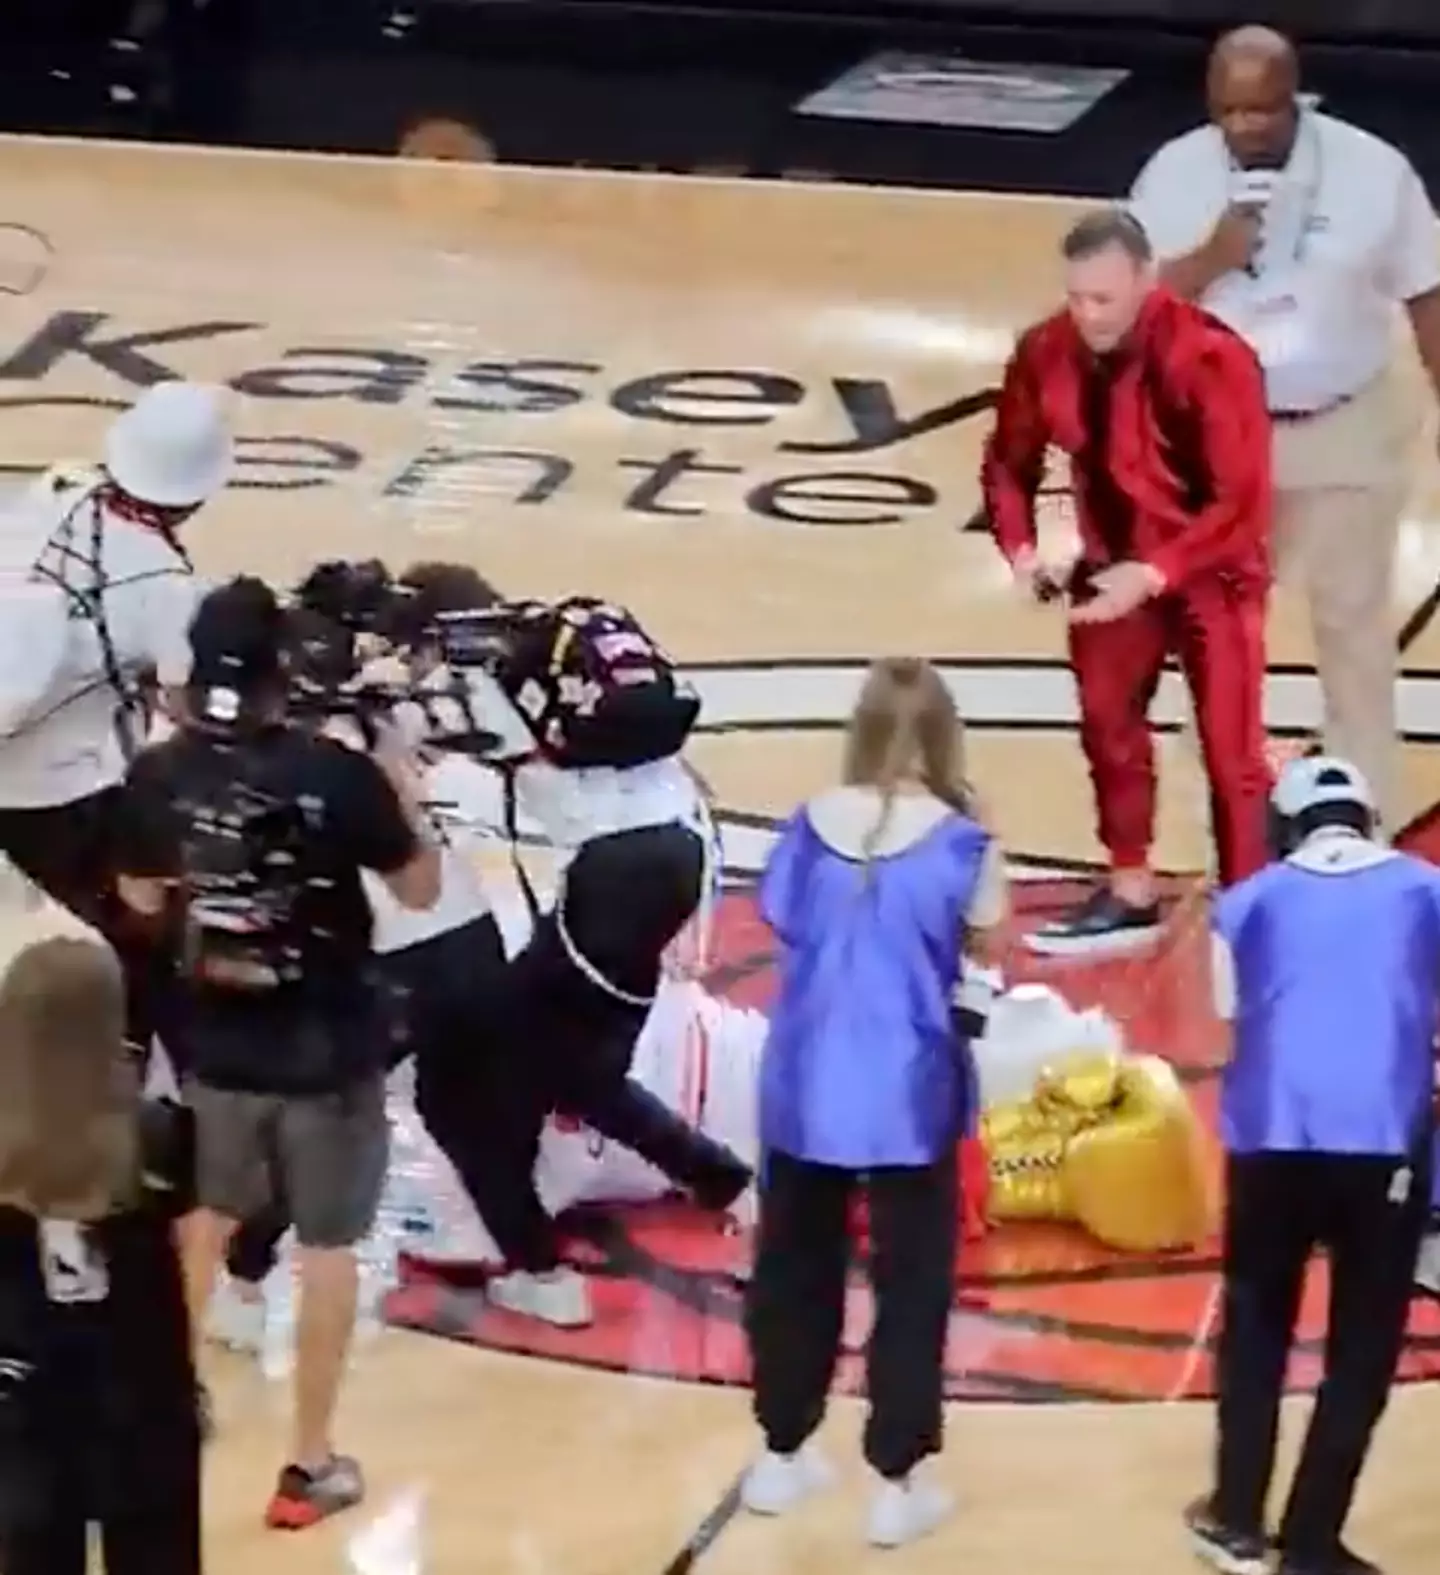 Staff at the game had to drag the mascot off the court.